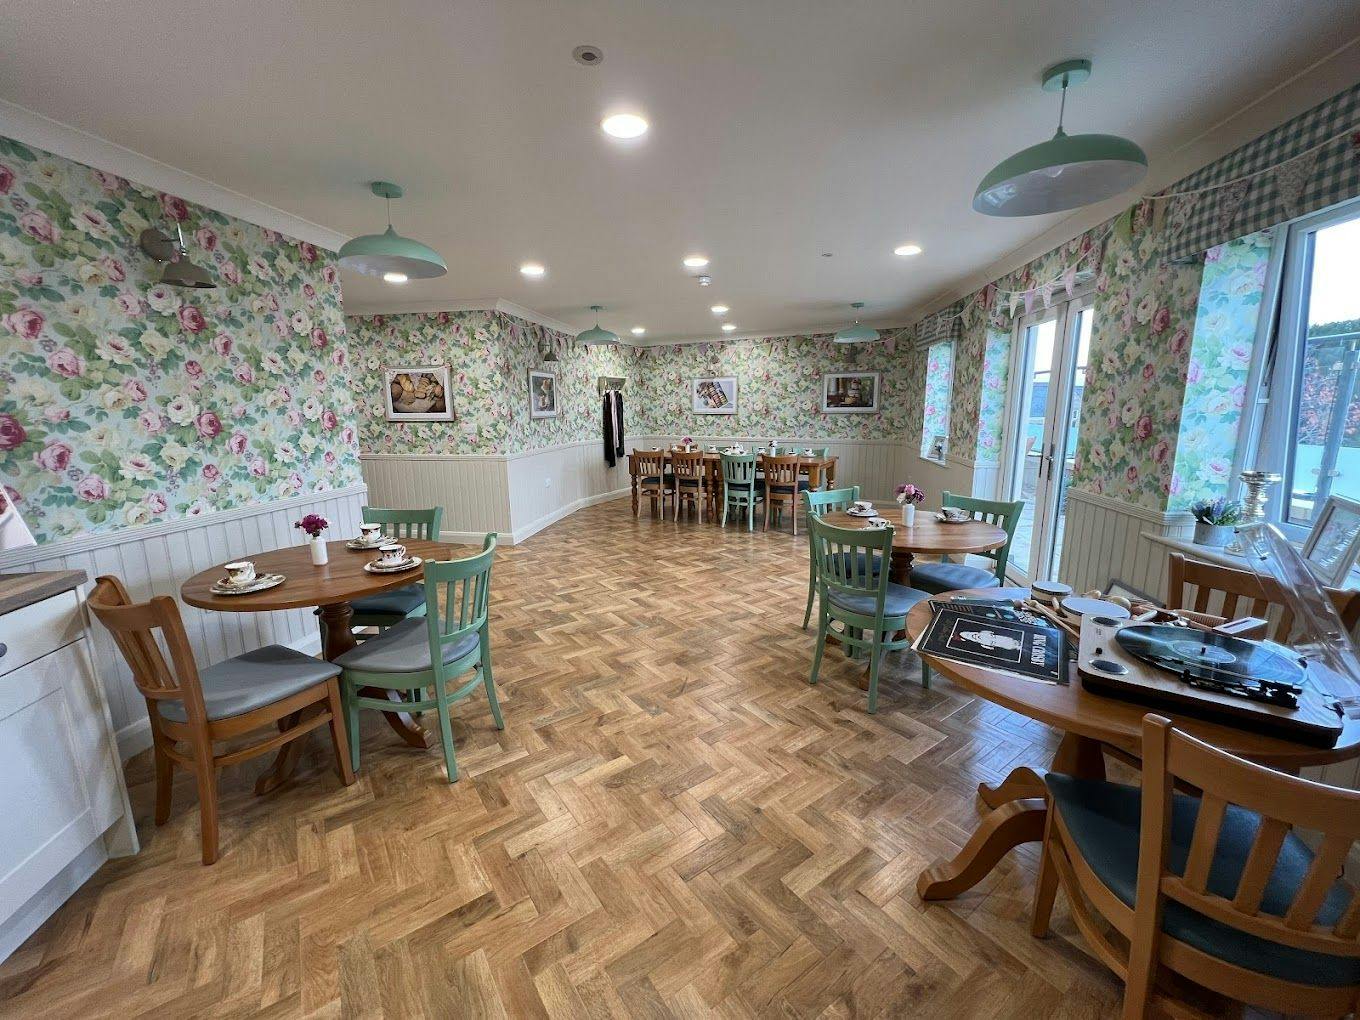 Dining room of Flowers Manor care home in Chippenham, Wiltshire